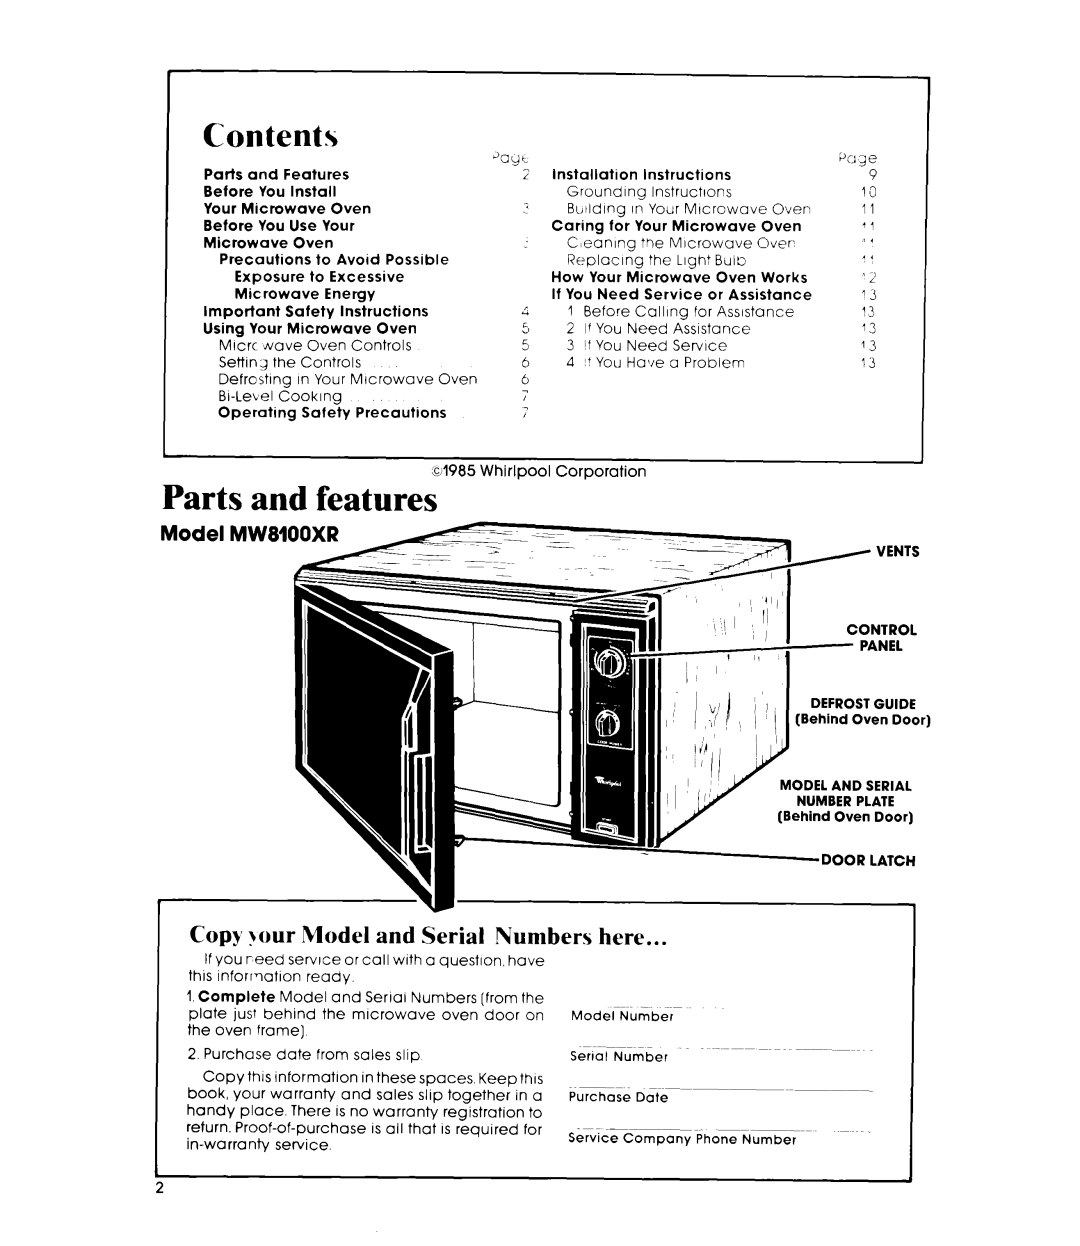 Whirlpool manual ContentsJogc, “uge, Parts and features, Copy Jour Model and Serial Numbers here, Model MW8100XR 